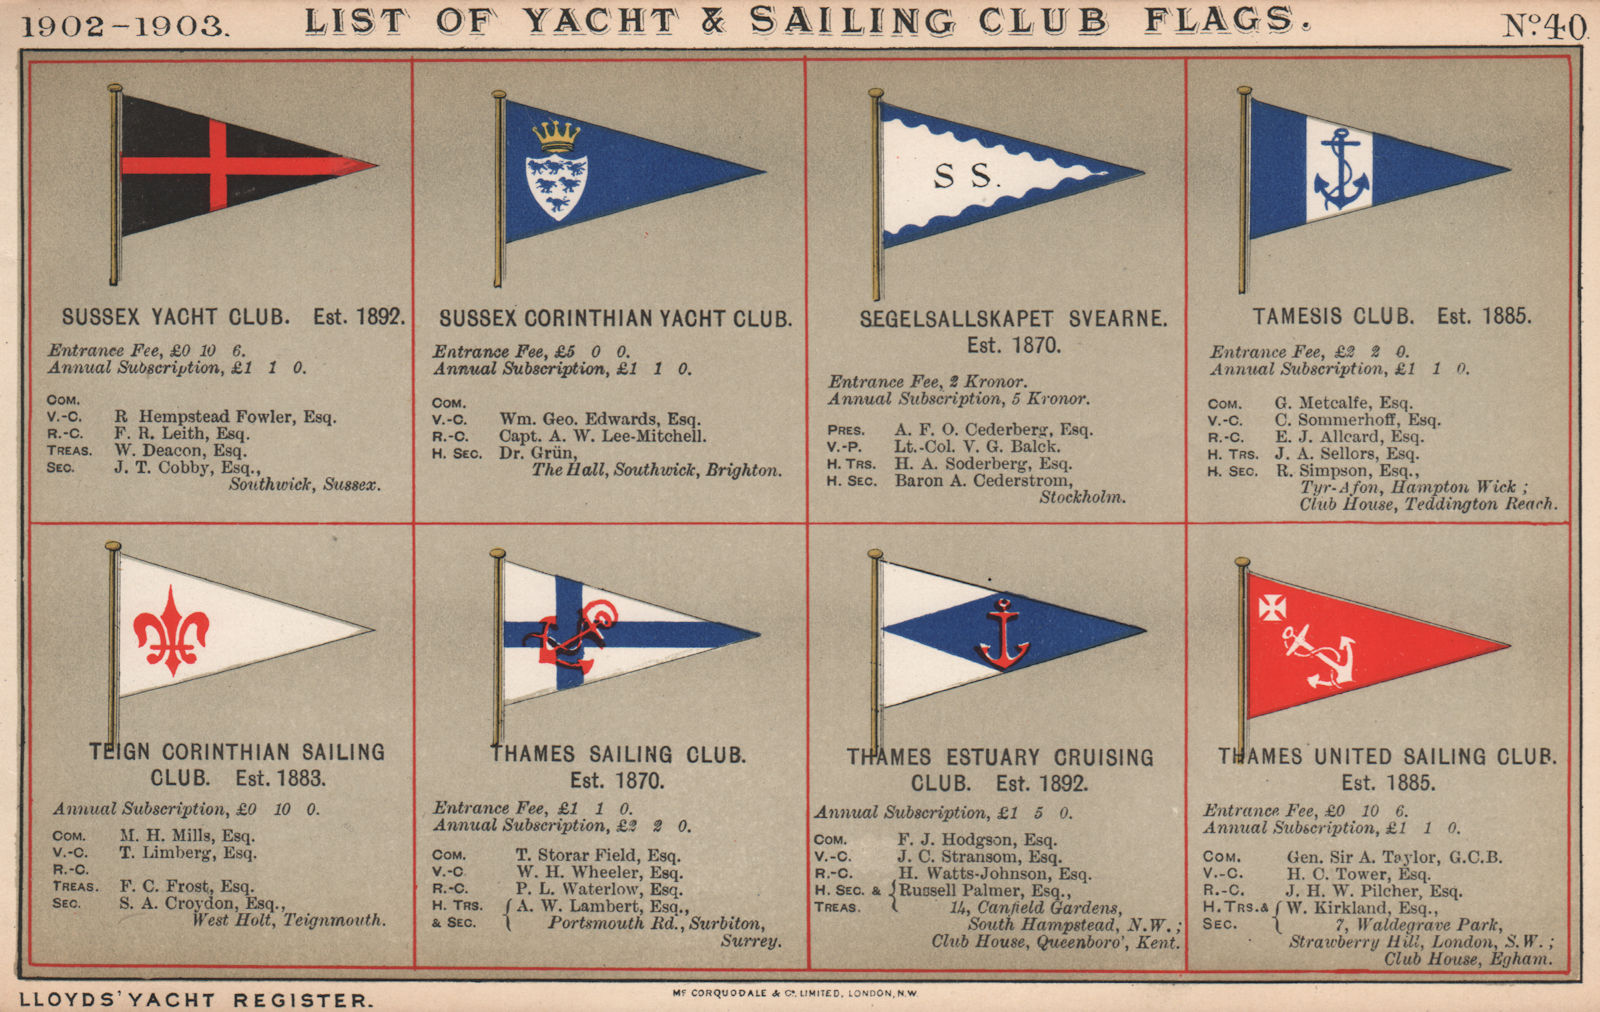 Associate Product YACHT & SAILING CLUB FLAGS S-T. Sussex - Tamesis - Teign - Thames United 1902